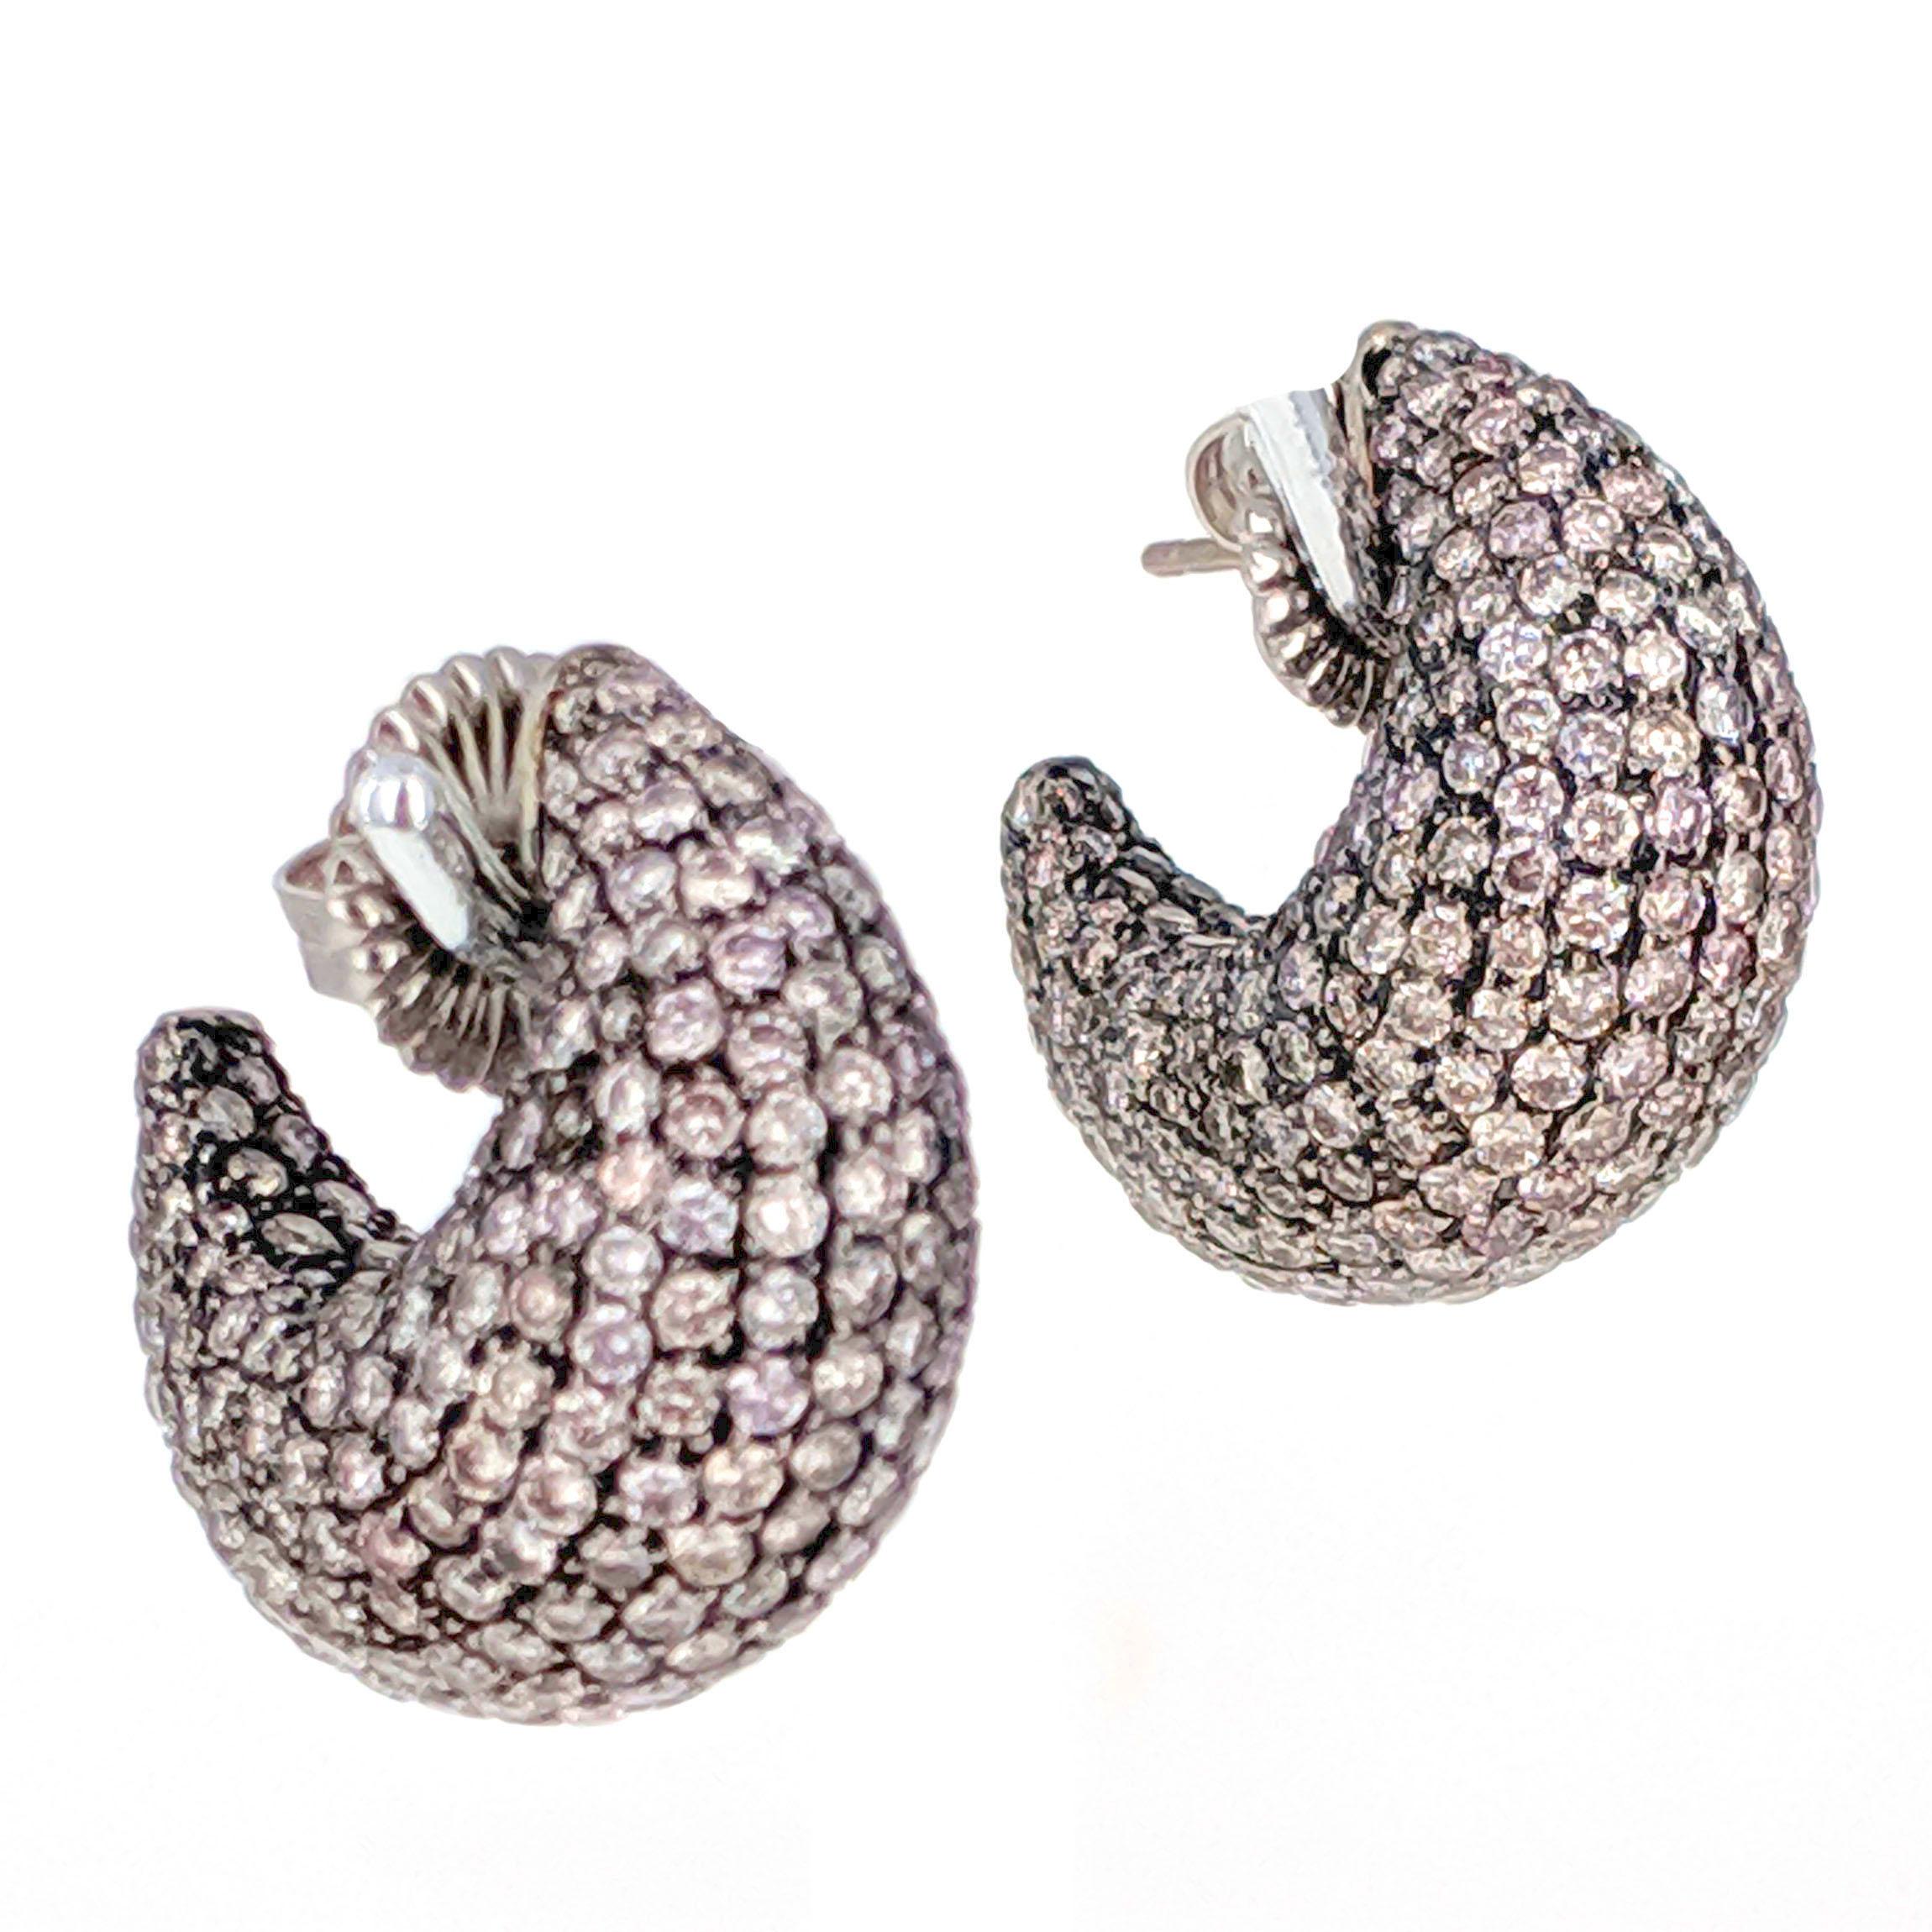 A pair of elegantly shaped bombe earrings pave-set with round-cut light brown diamonds weighing approximately 6 carats in total. Mounted in blackened 18 karat gold. Bold and feminine, the blackened gold contrasts against the warm diamonds.